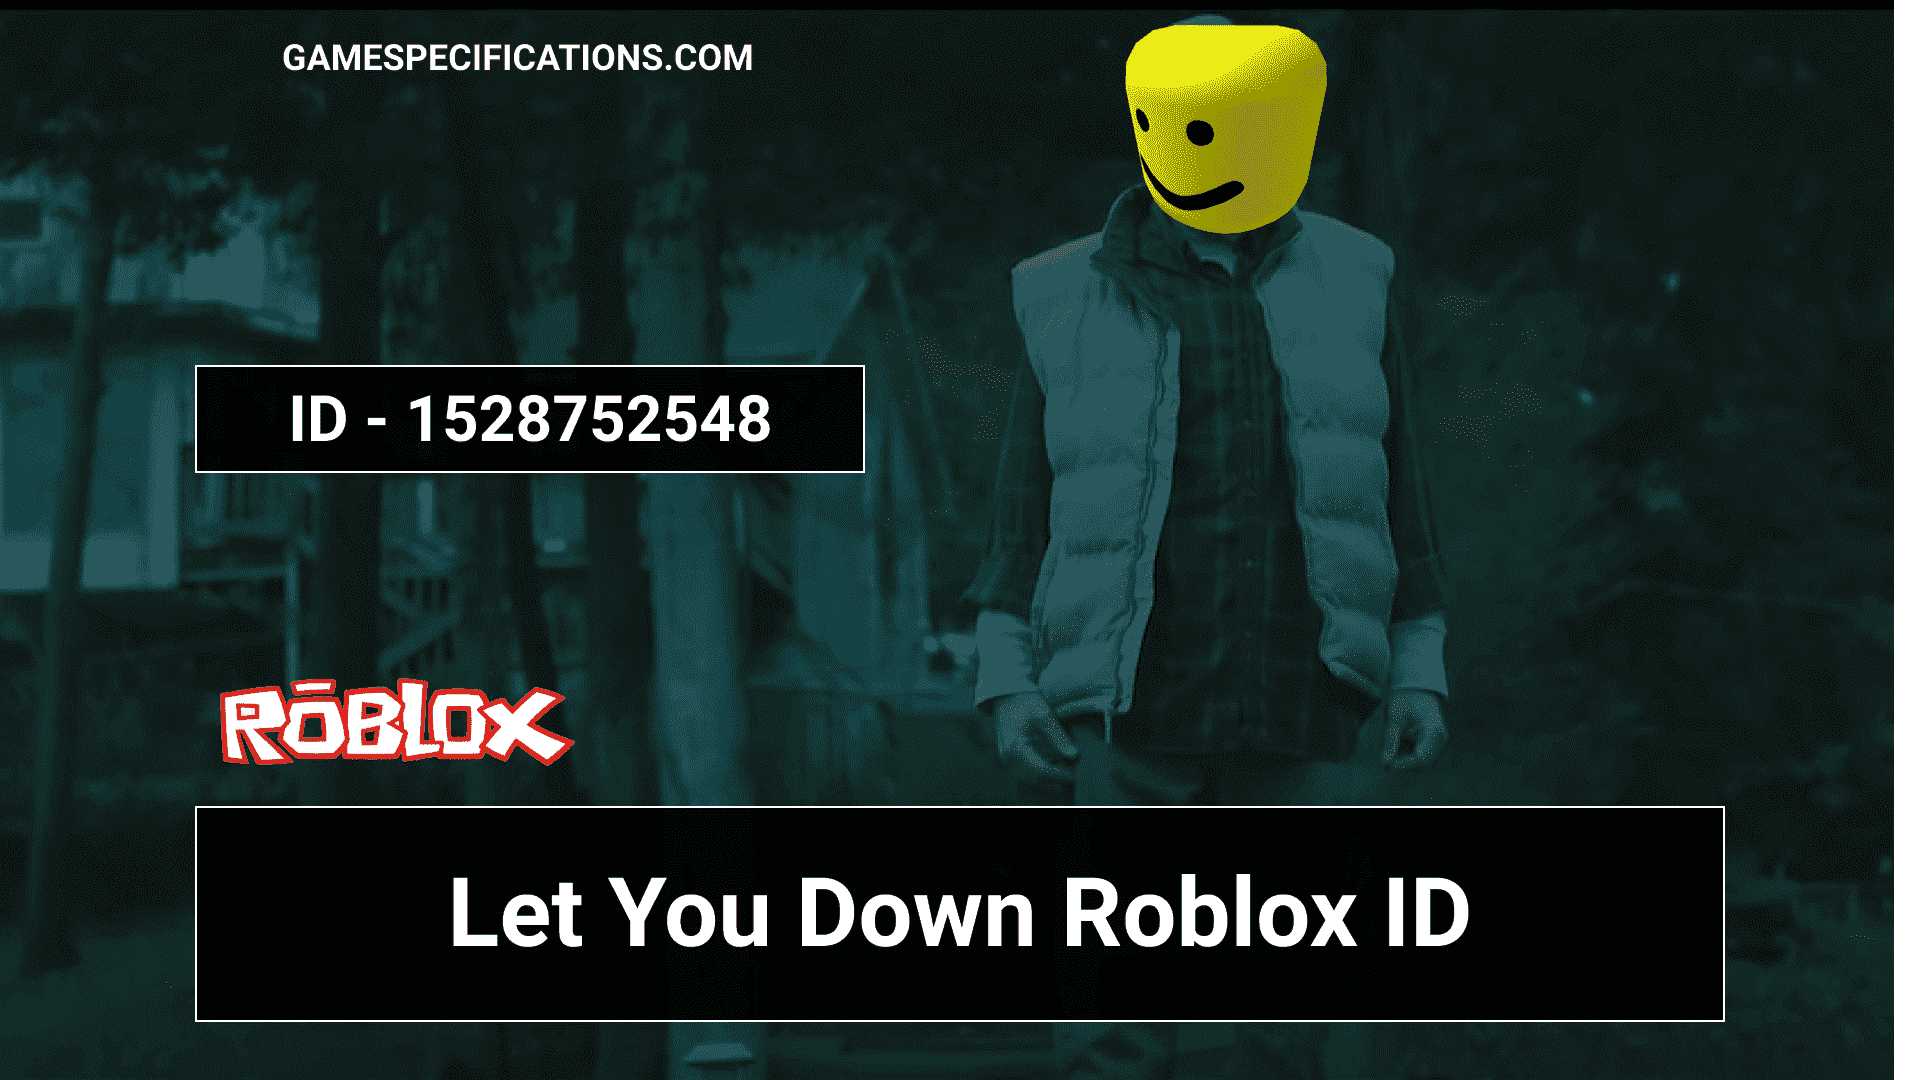 Let You Down Roblox Id Codes To Play The Nf Music 2021 Game Specifications - roblox song id for this i'm out